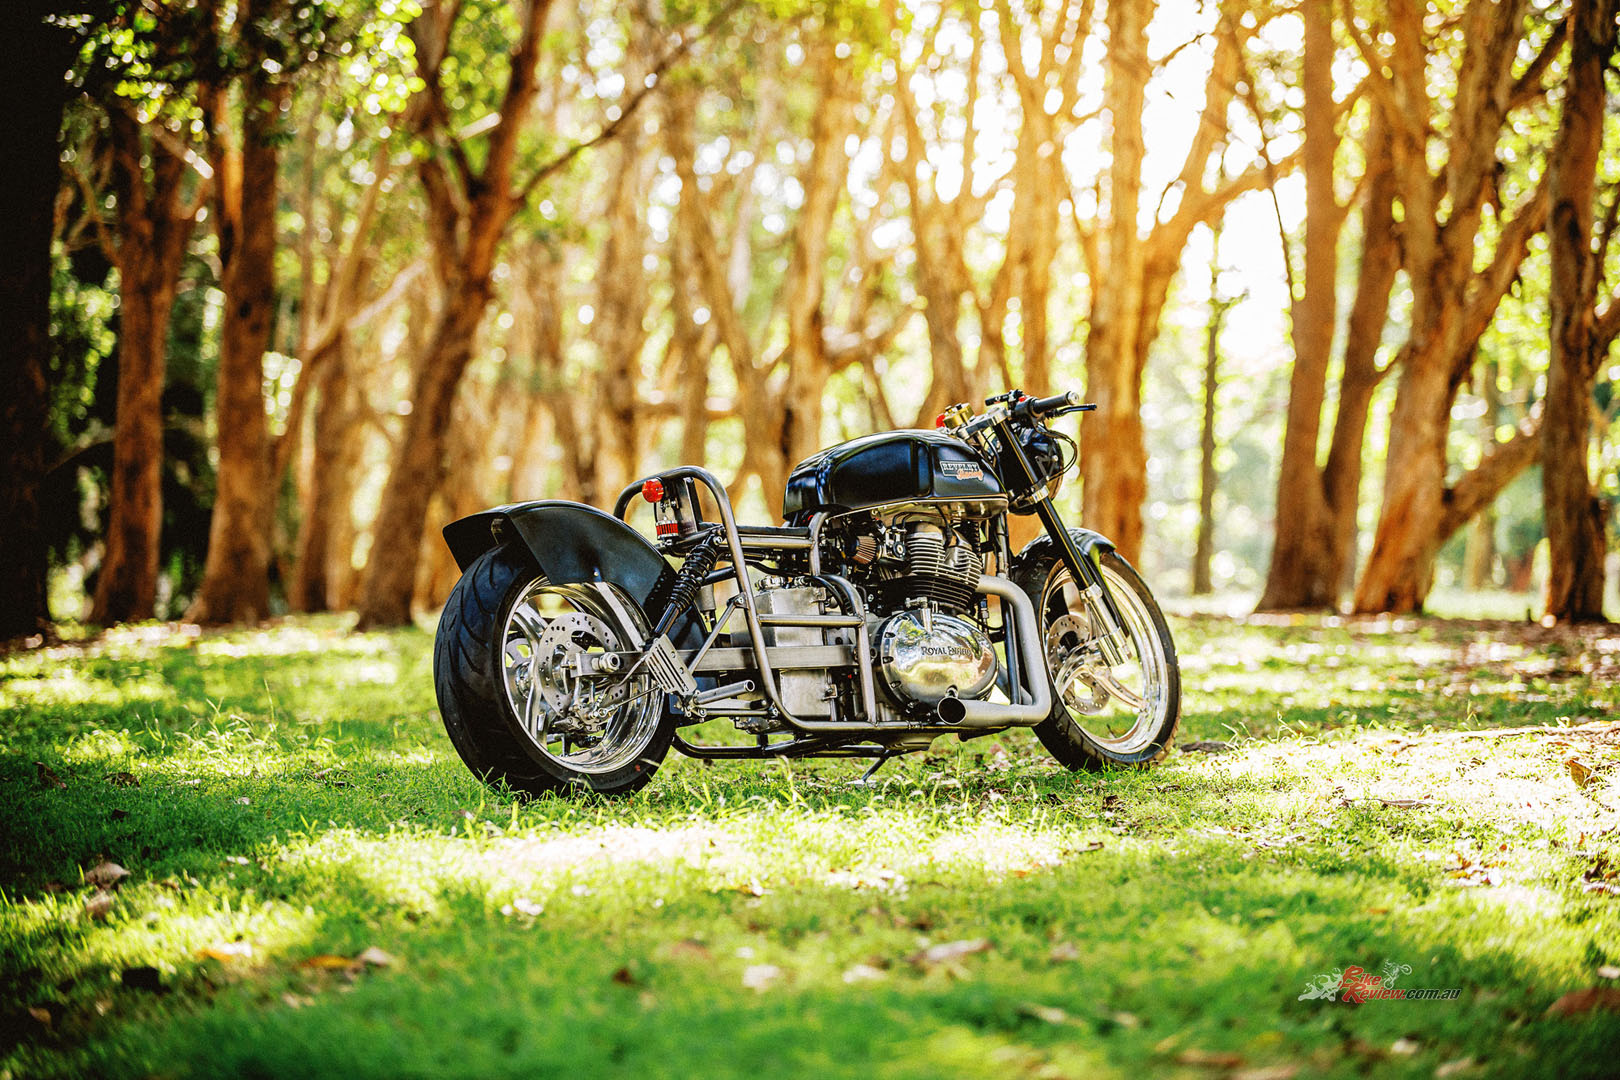 Over the other side of the country, Revelry Cycles Sydney submitted their mental ‘RevElation’ 650 Twin Salt Racer. 